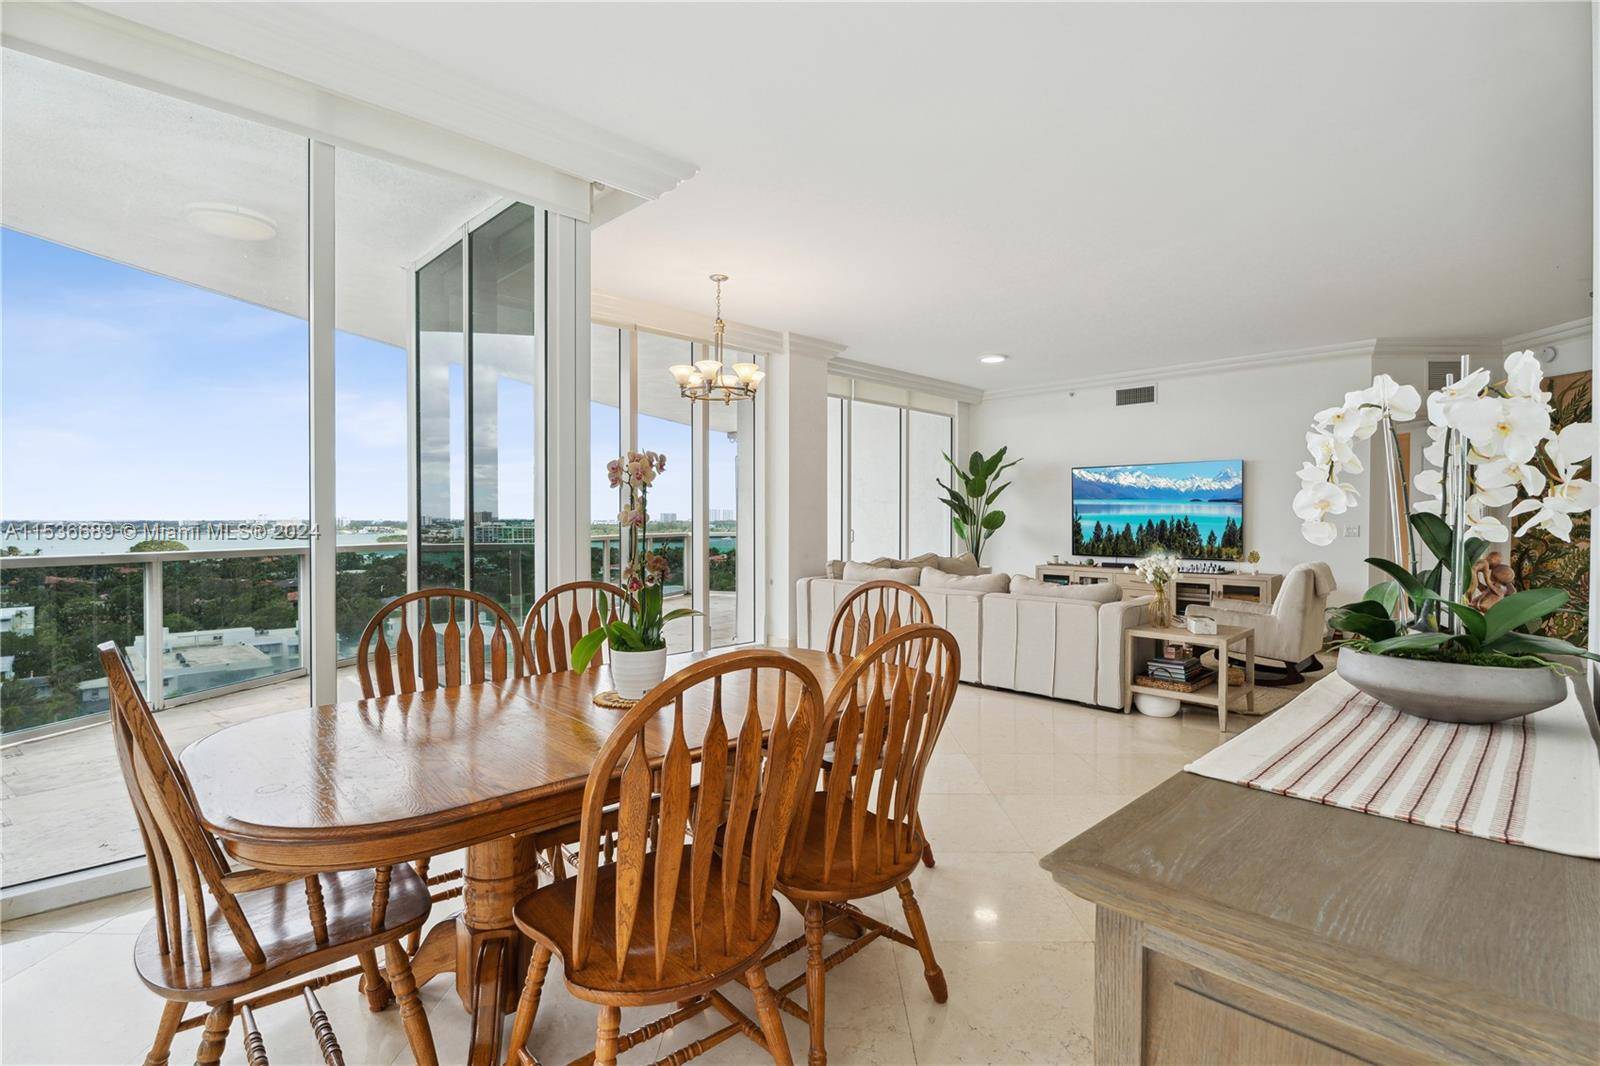 Seize the opportunity to make this Bellini residence your new home, where sophistication meets serenity in the coveted Bal Harbour neighborhood.